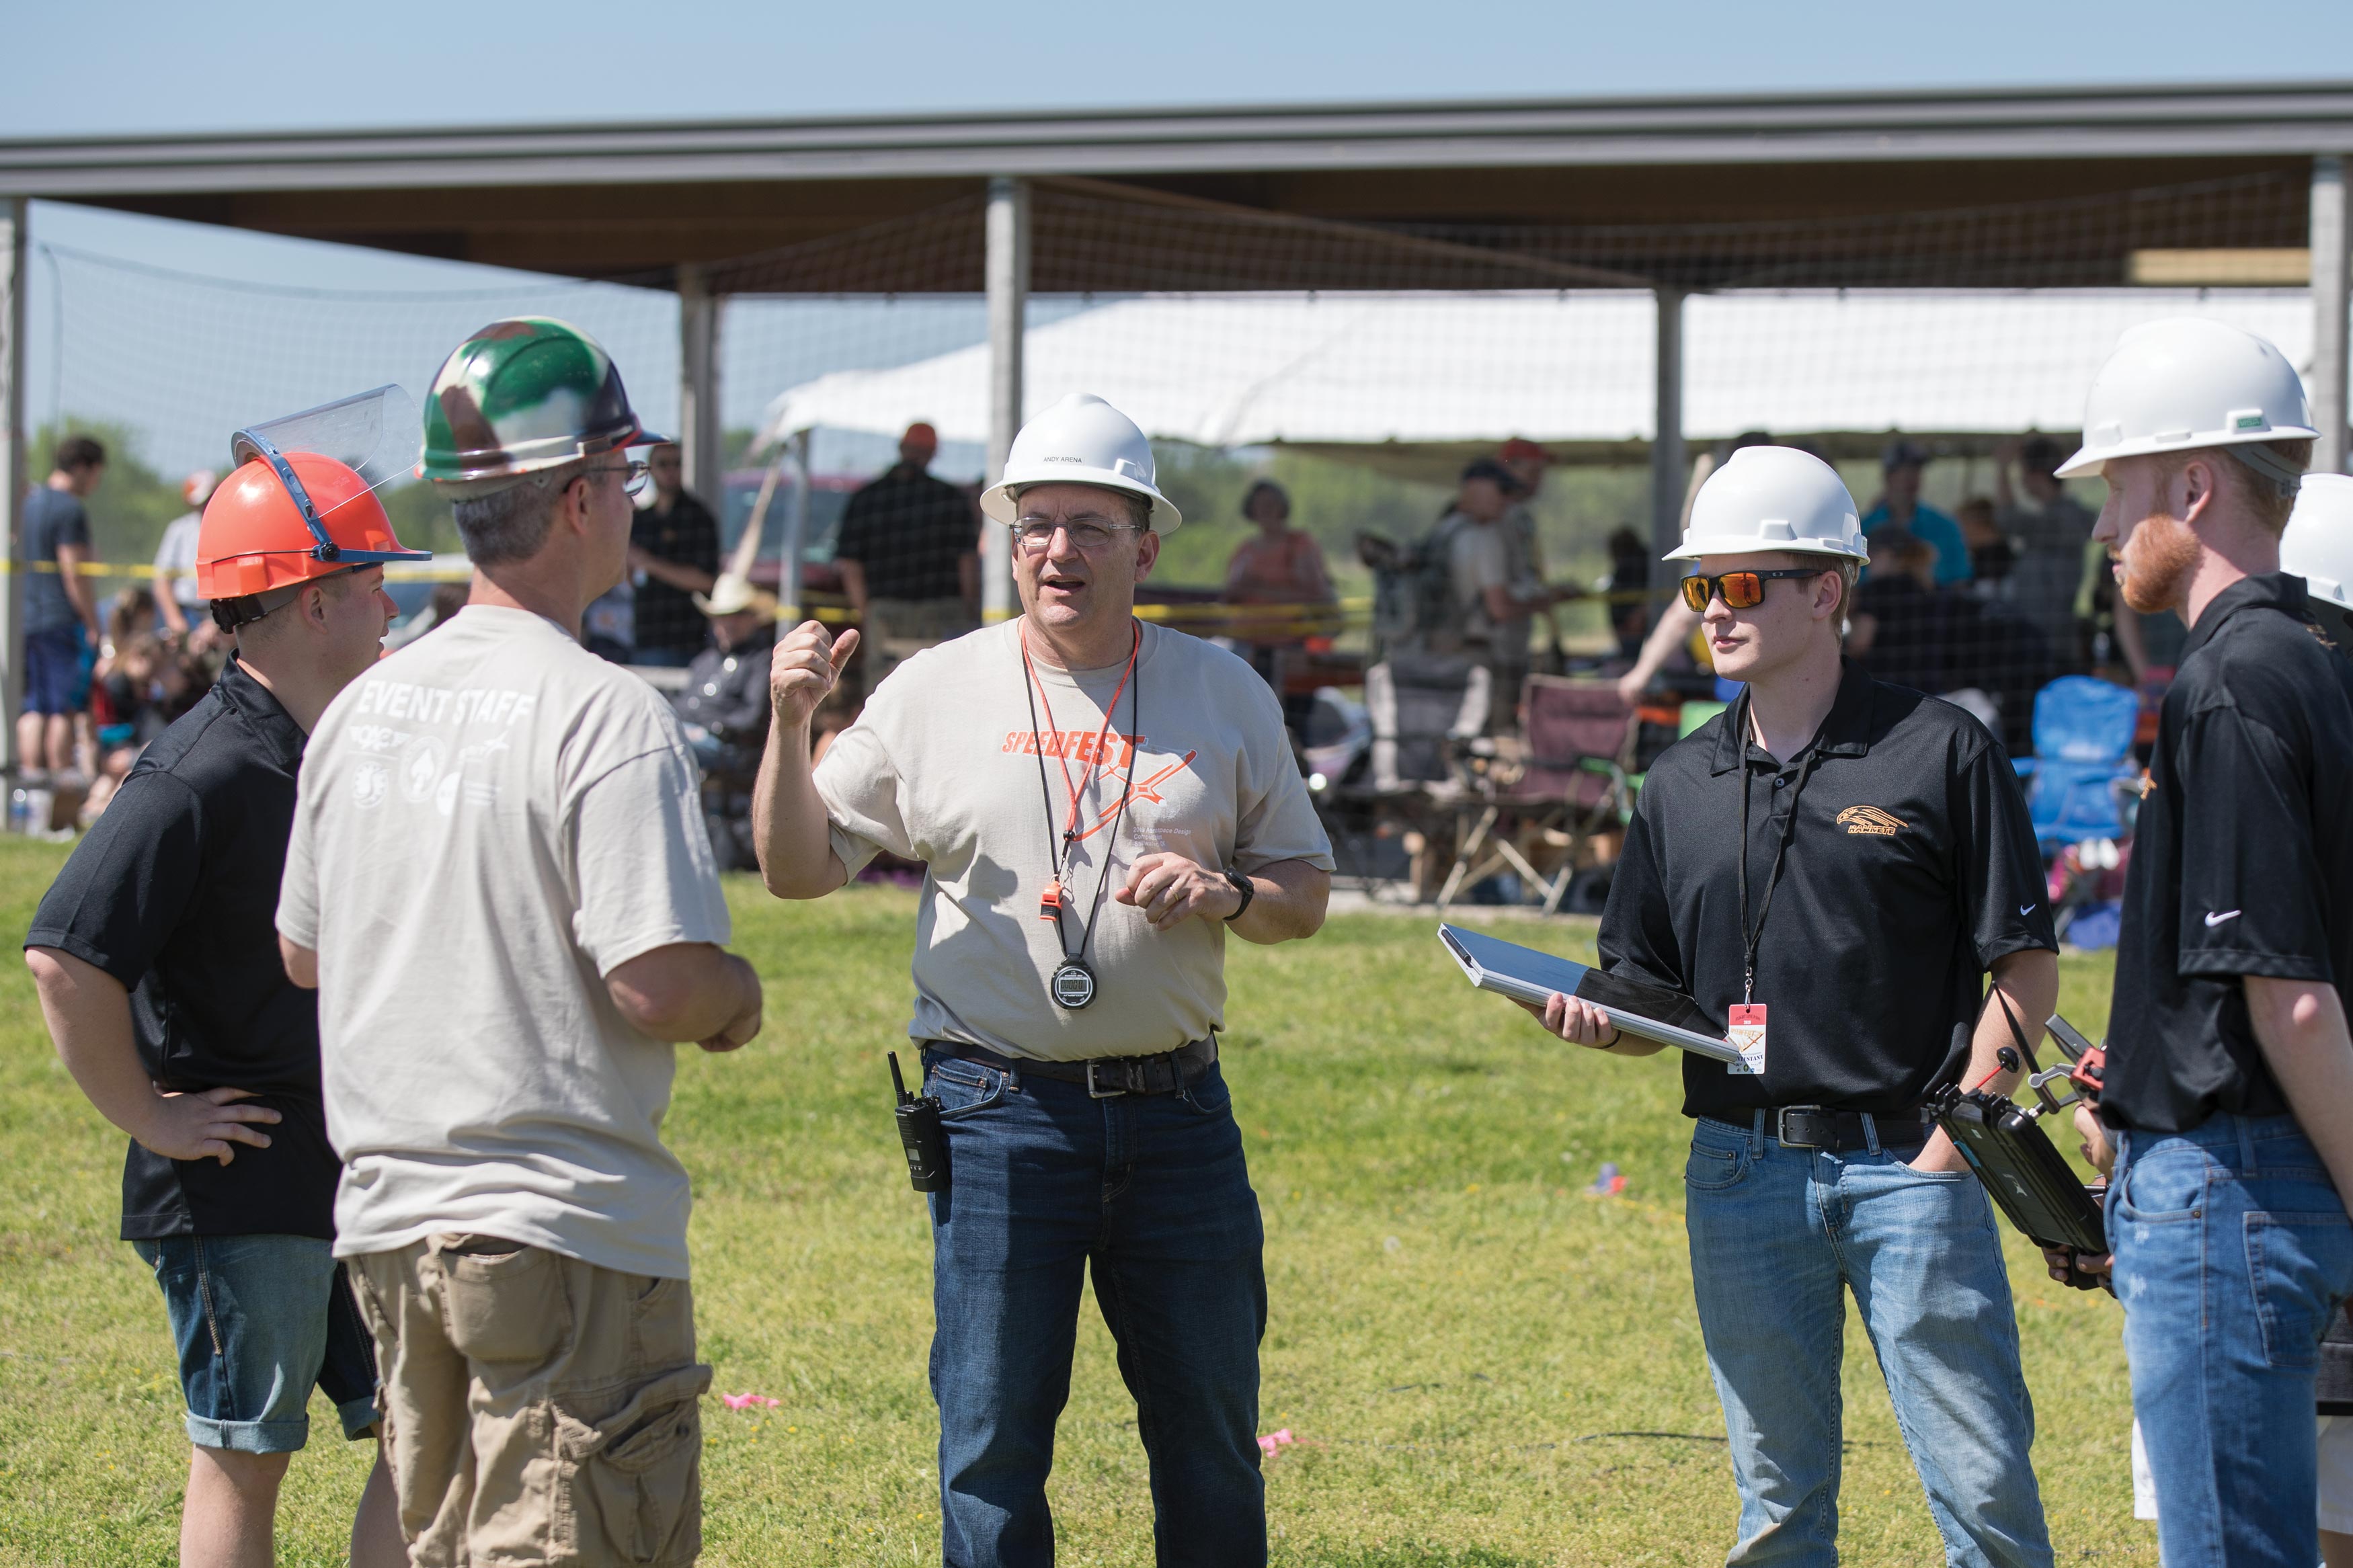 Dr. Andy Arena (center) championed the idea of Speedfest as a way to showcase the abilities of students, both college and high school, using an aircraft design, build and fly competition. The annual event continues to grow and draws hundreds of students each year.